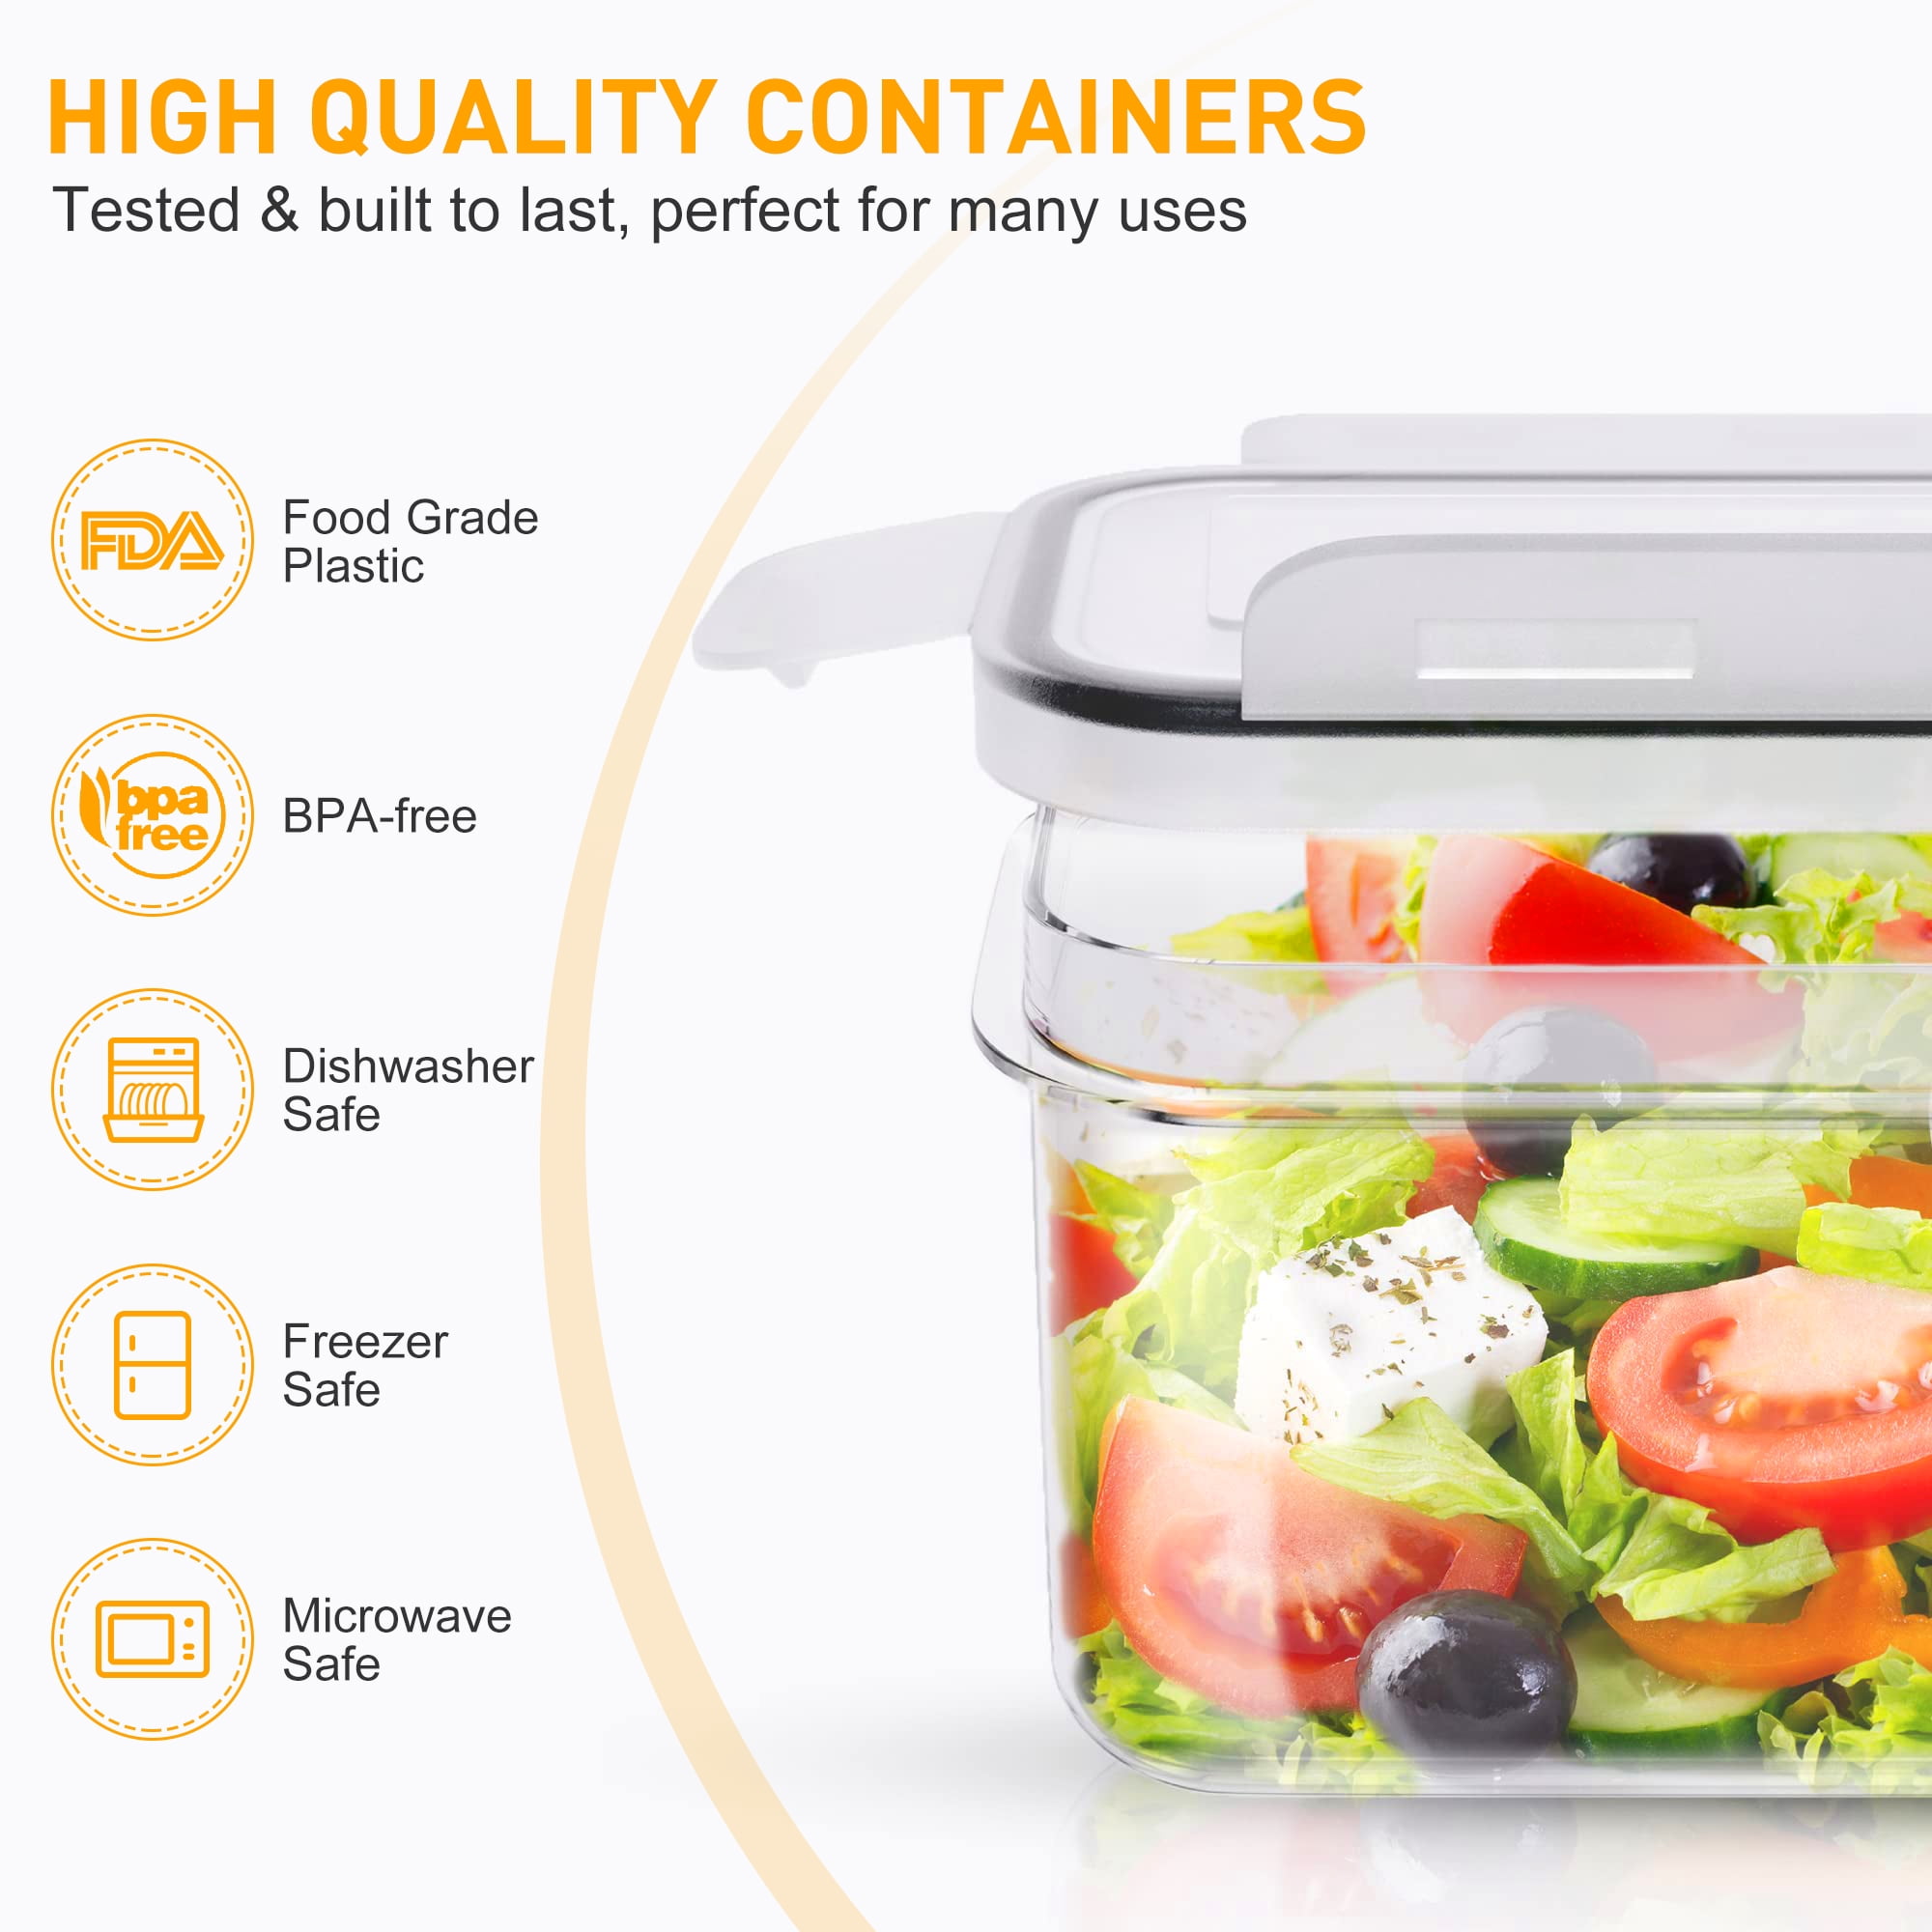 Seseno 24 Pack Airtight Food Storage Container Set - BPA Free Clear Plastic Kitchen and Pantry Organization Canisters with Durable Lids for Cereal Dry